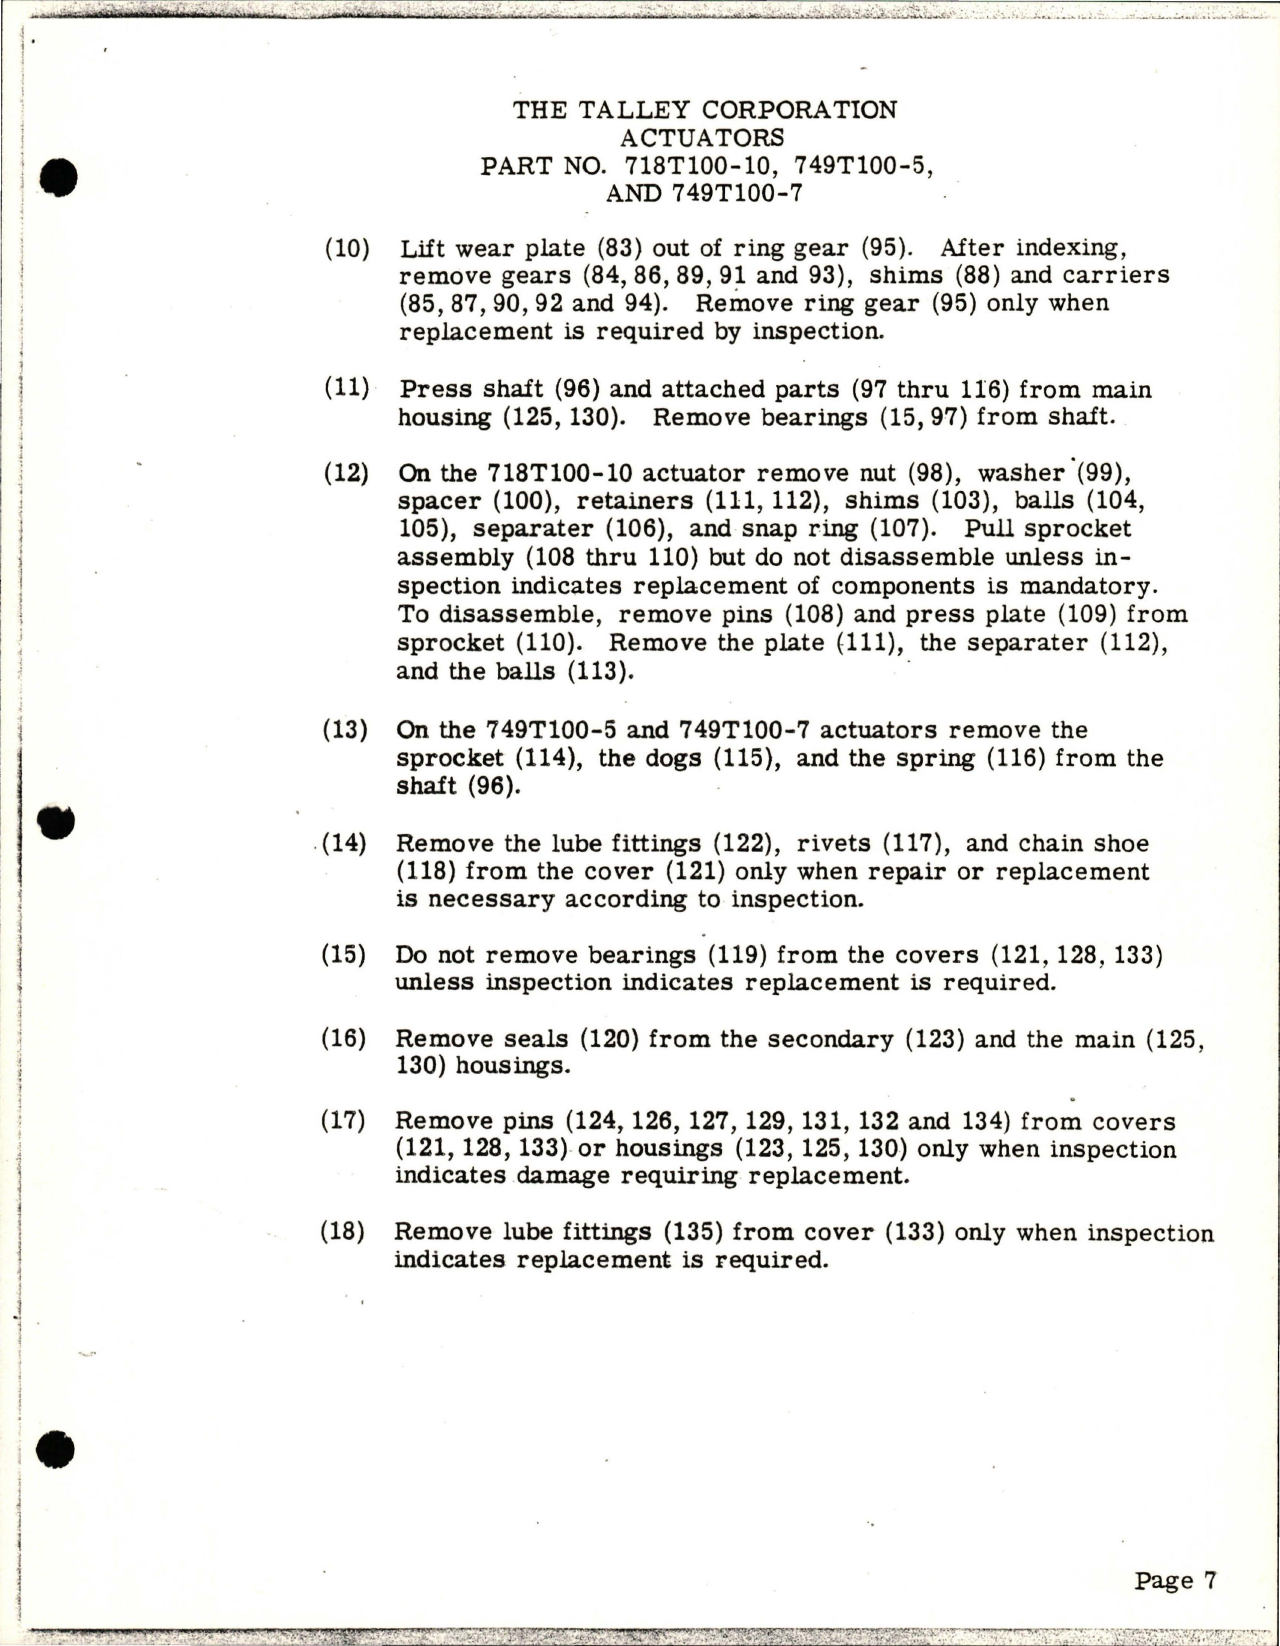 Sample page 9 from AirCorps Library document: Overhaul & Illustrated Parts List for Aileron and Rudder Trim Actuator - 718T100-10, 749T100-5, and 749T100-7